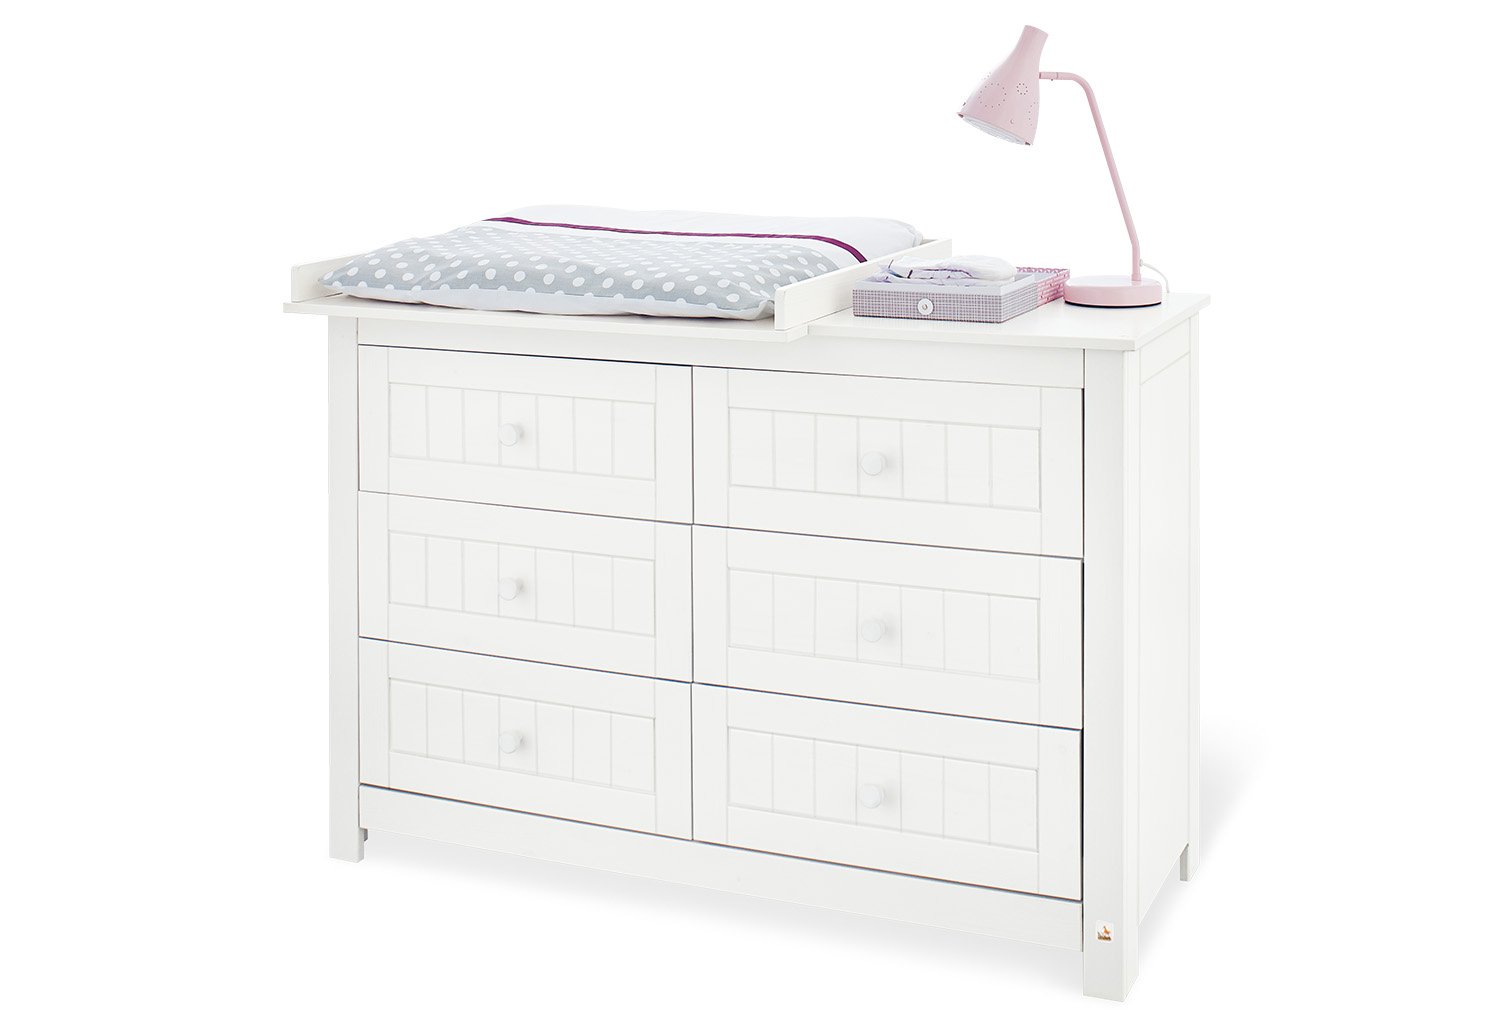 Pinolino 131617X Extra Wide Changing Table Changing/Changing Nappy Changing Romantic removable, Spruce, 85 x 75 x 95 cm, White